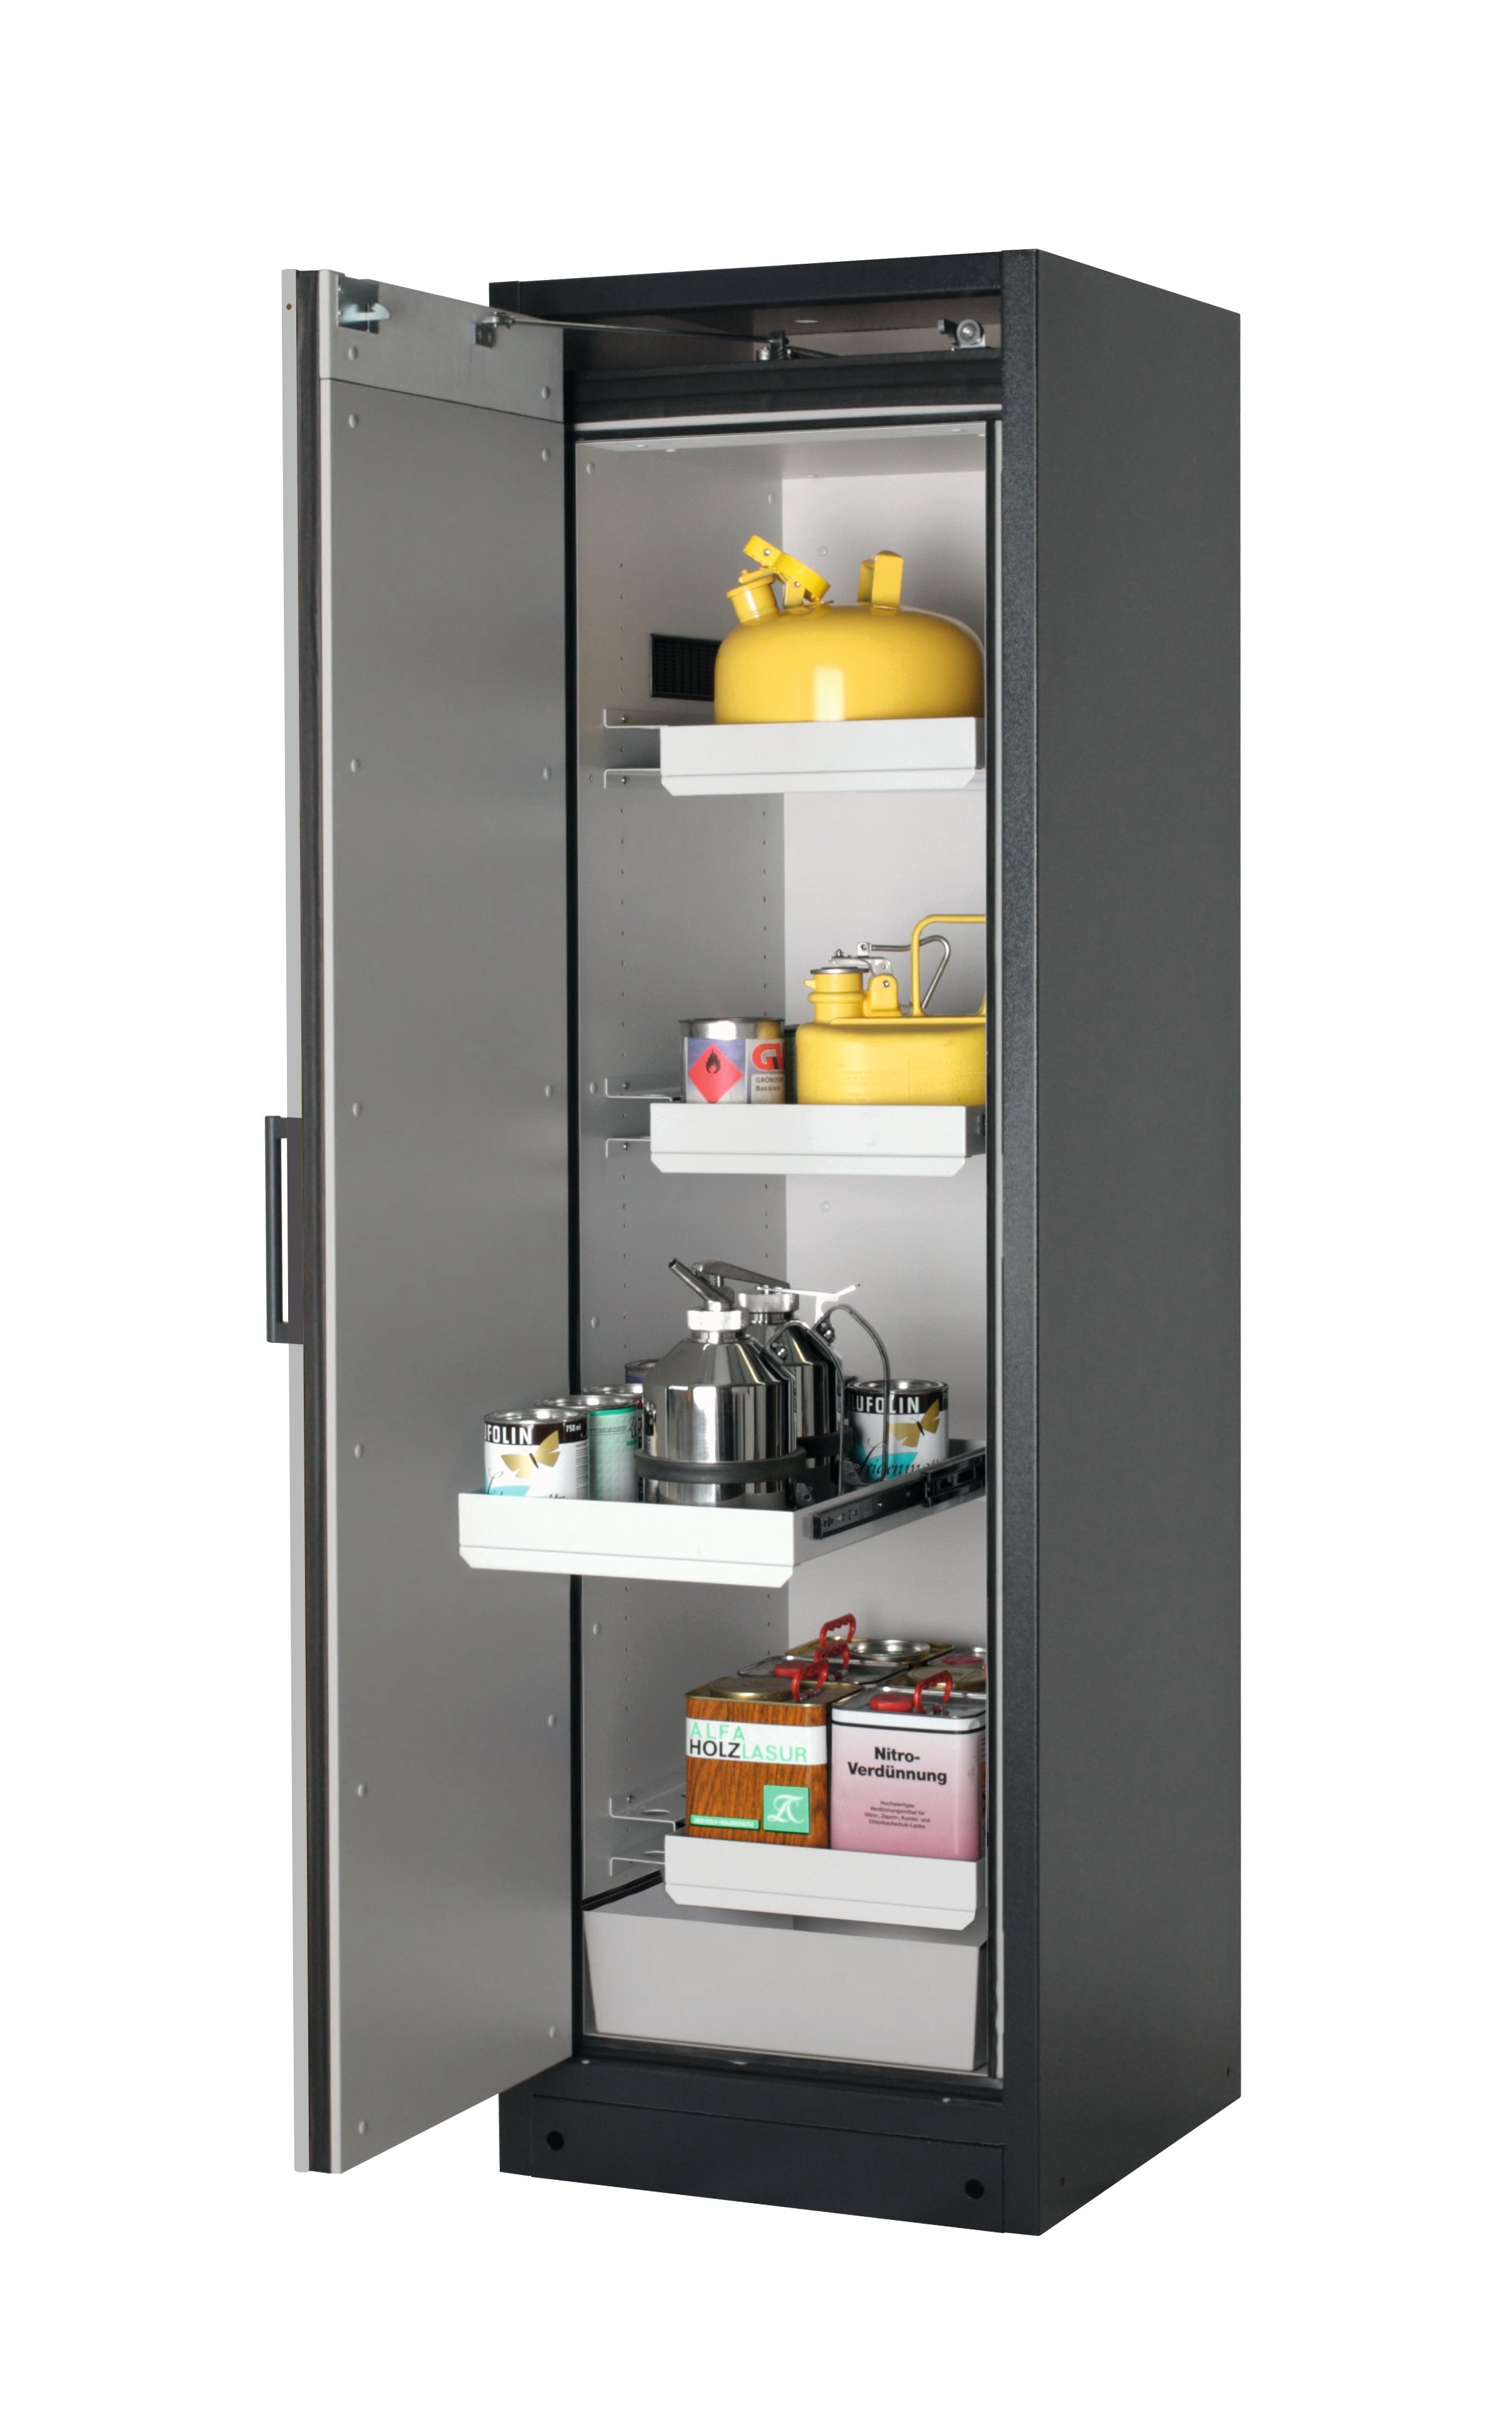 Type 90 safety storage cabinet Q-CLASSIC-90 model Q90.195.060 in pure white RAL 9010 with 3x drawer (standard) (sheet steel),